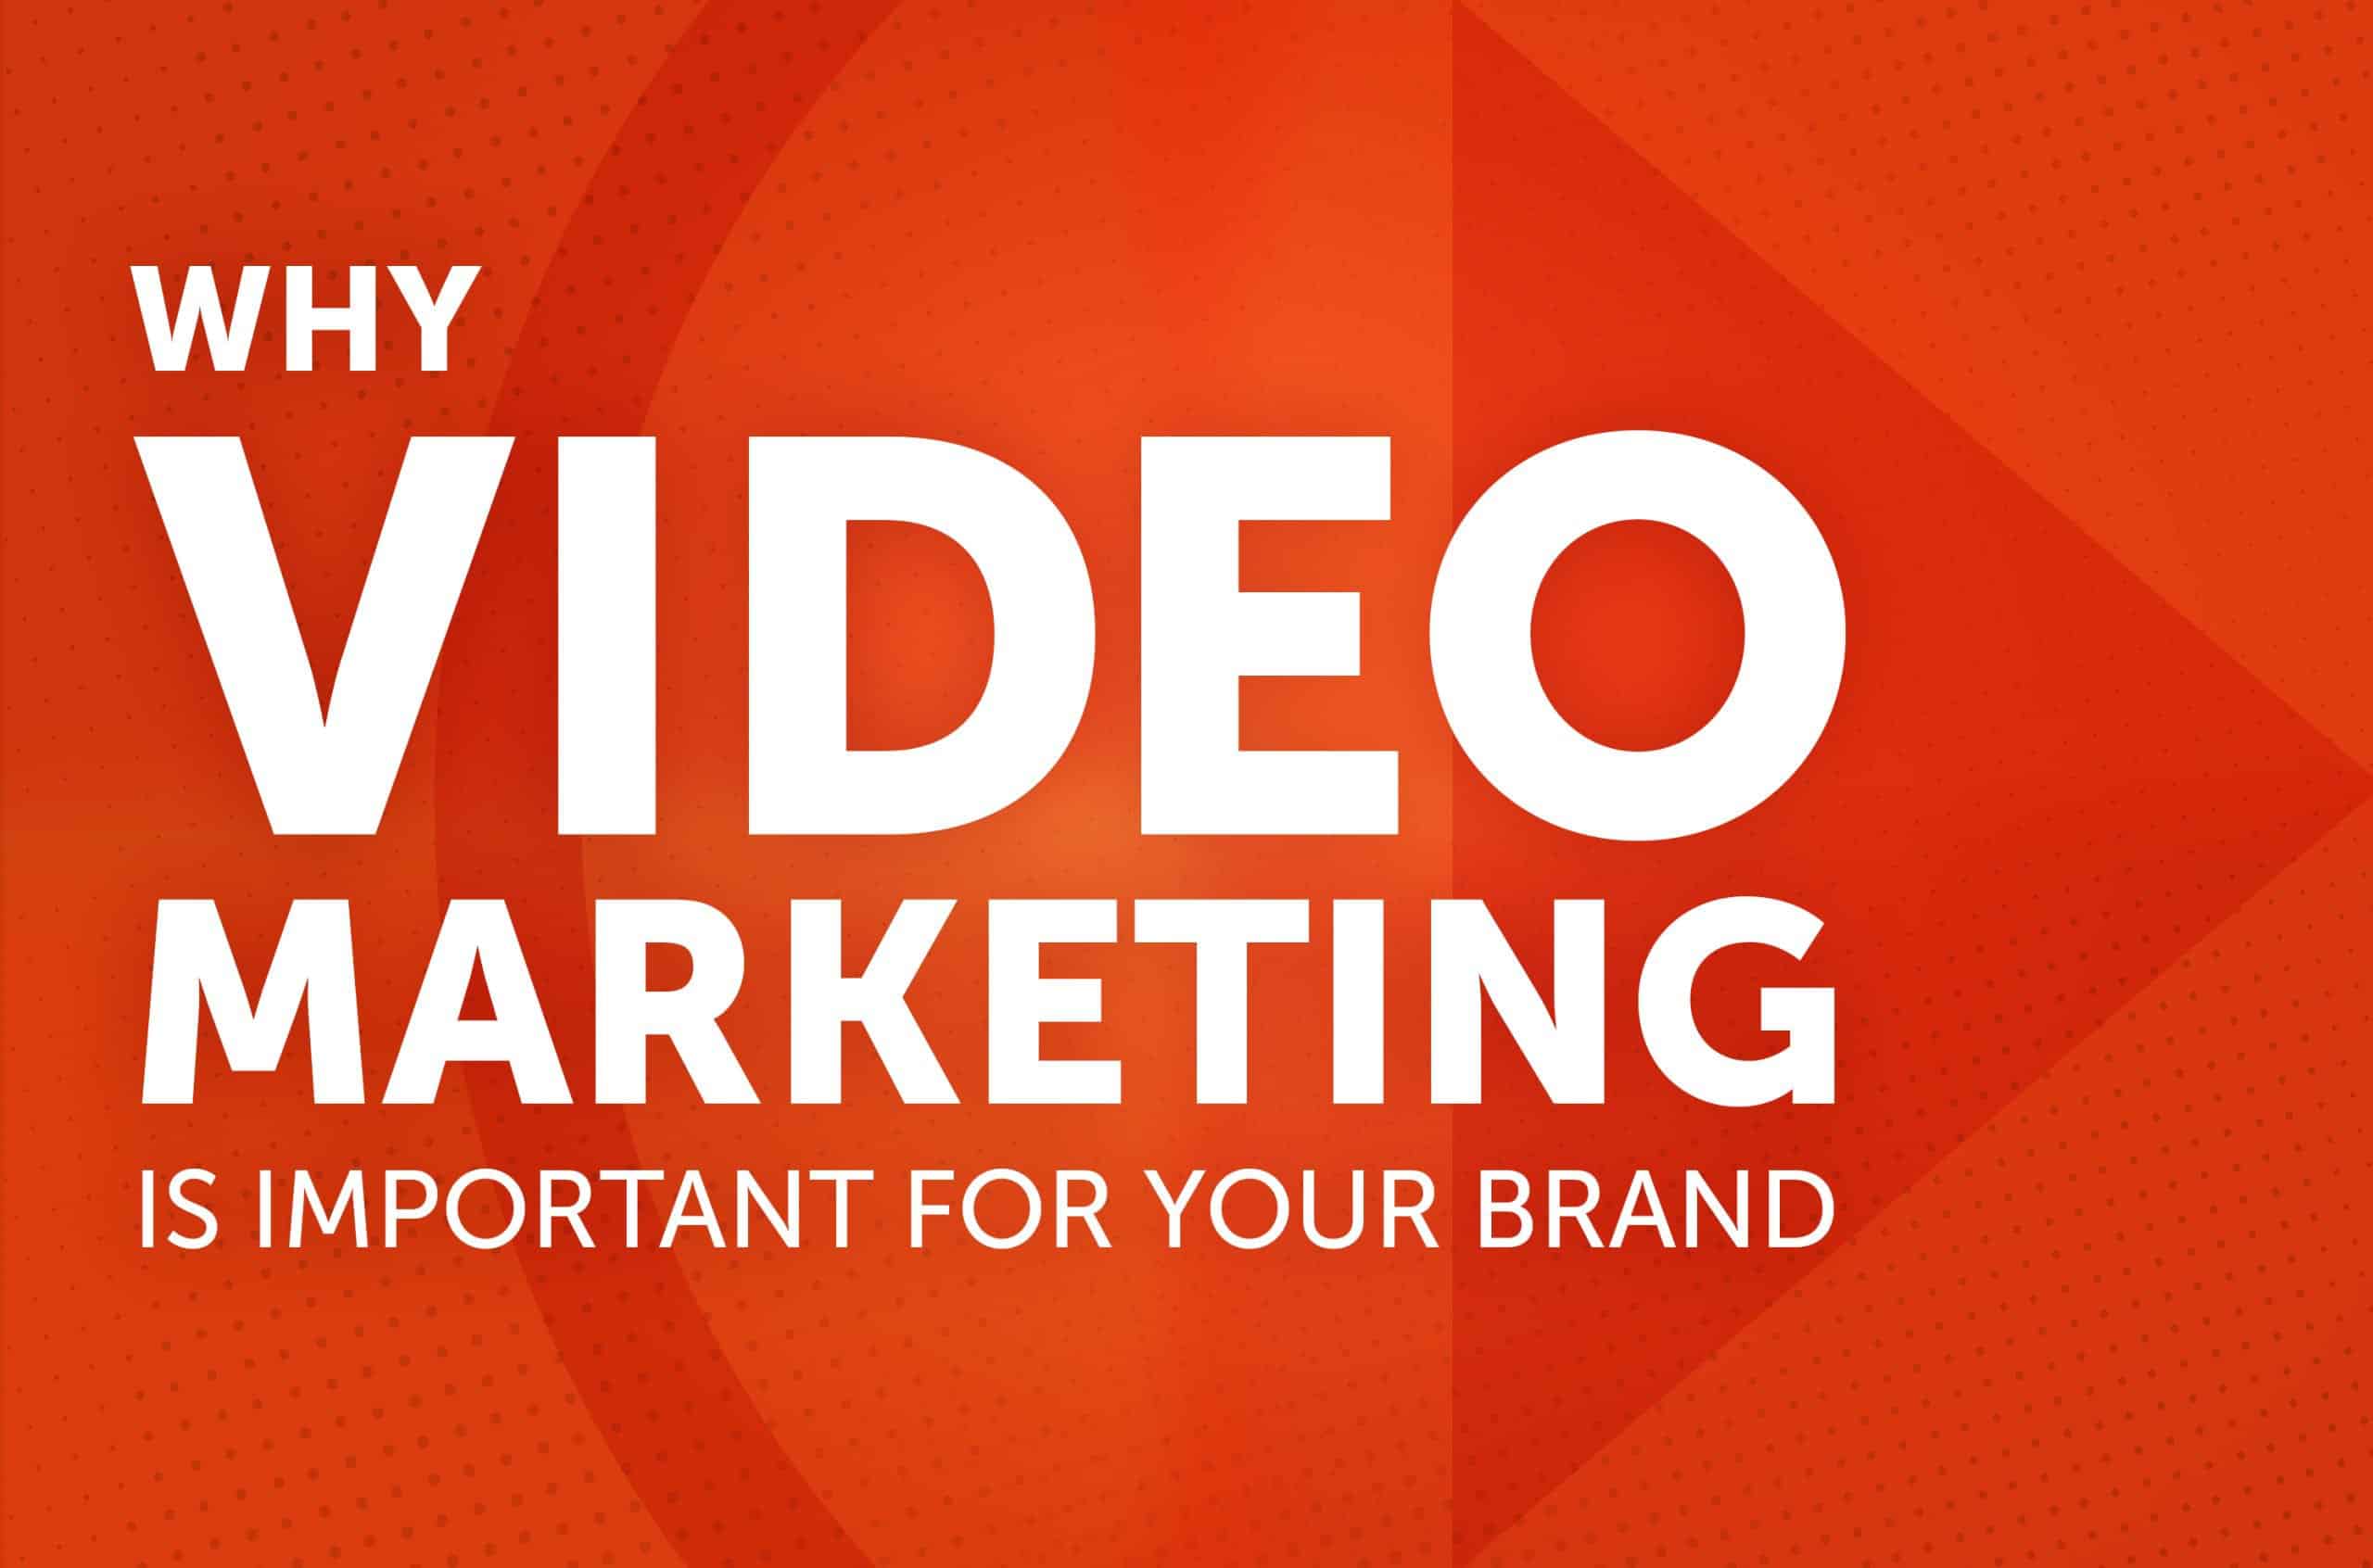 Why Video Marketing is Important for your Brand